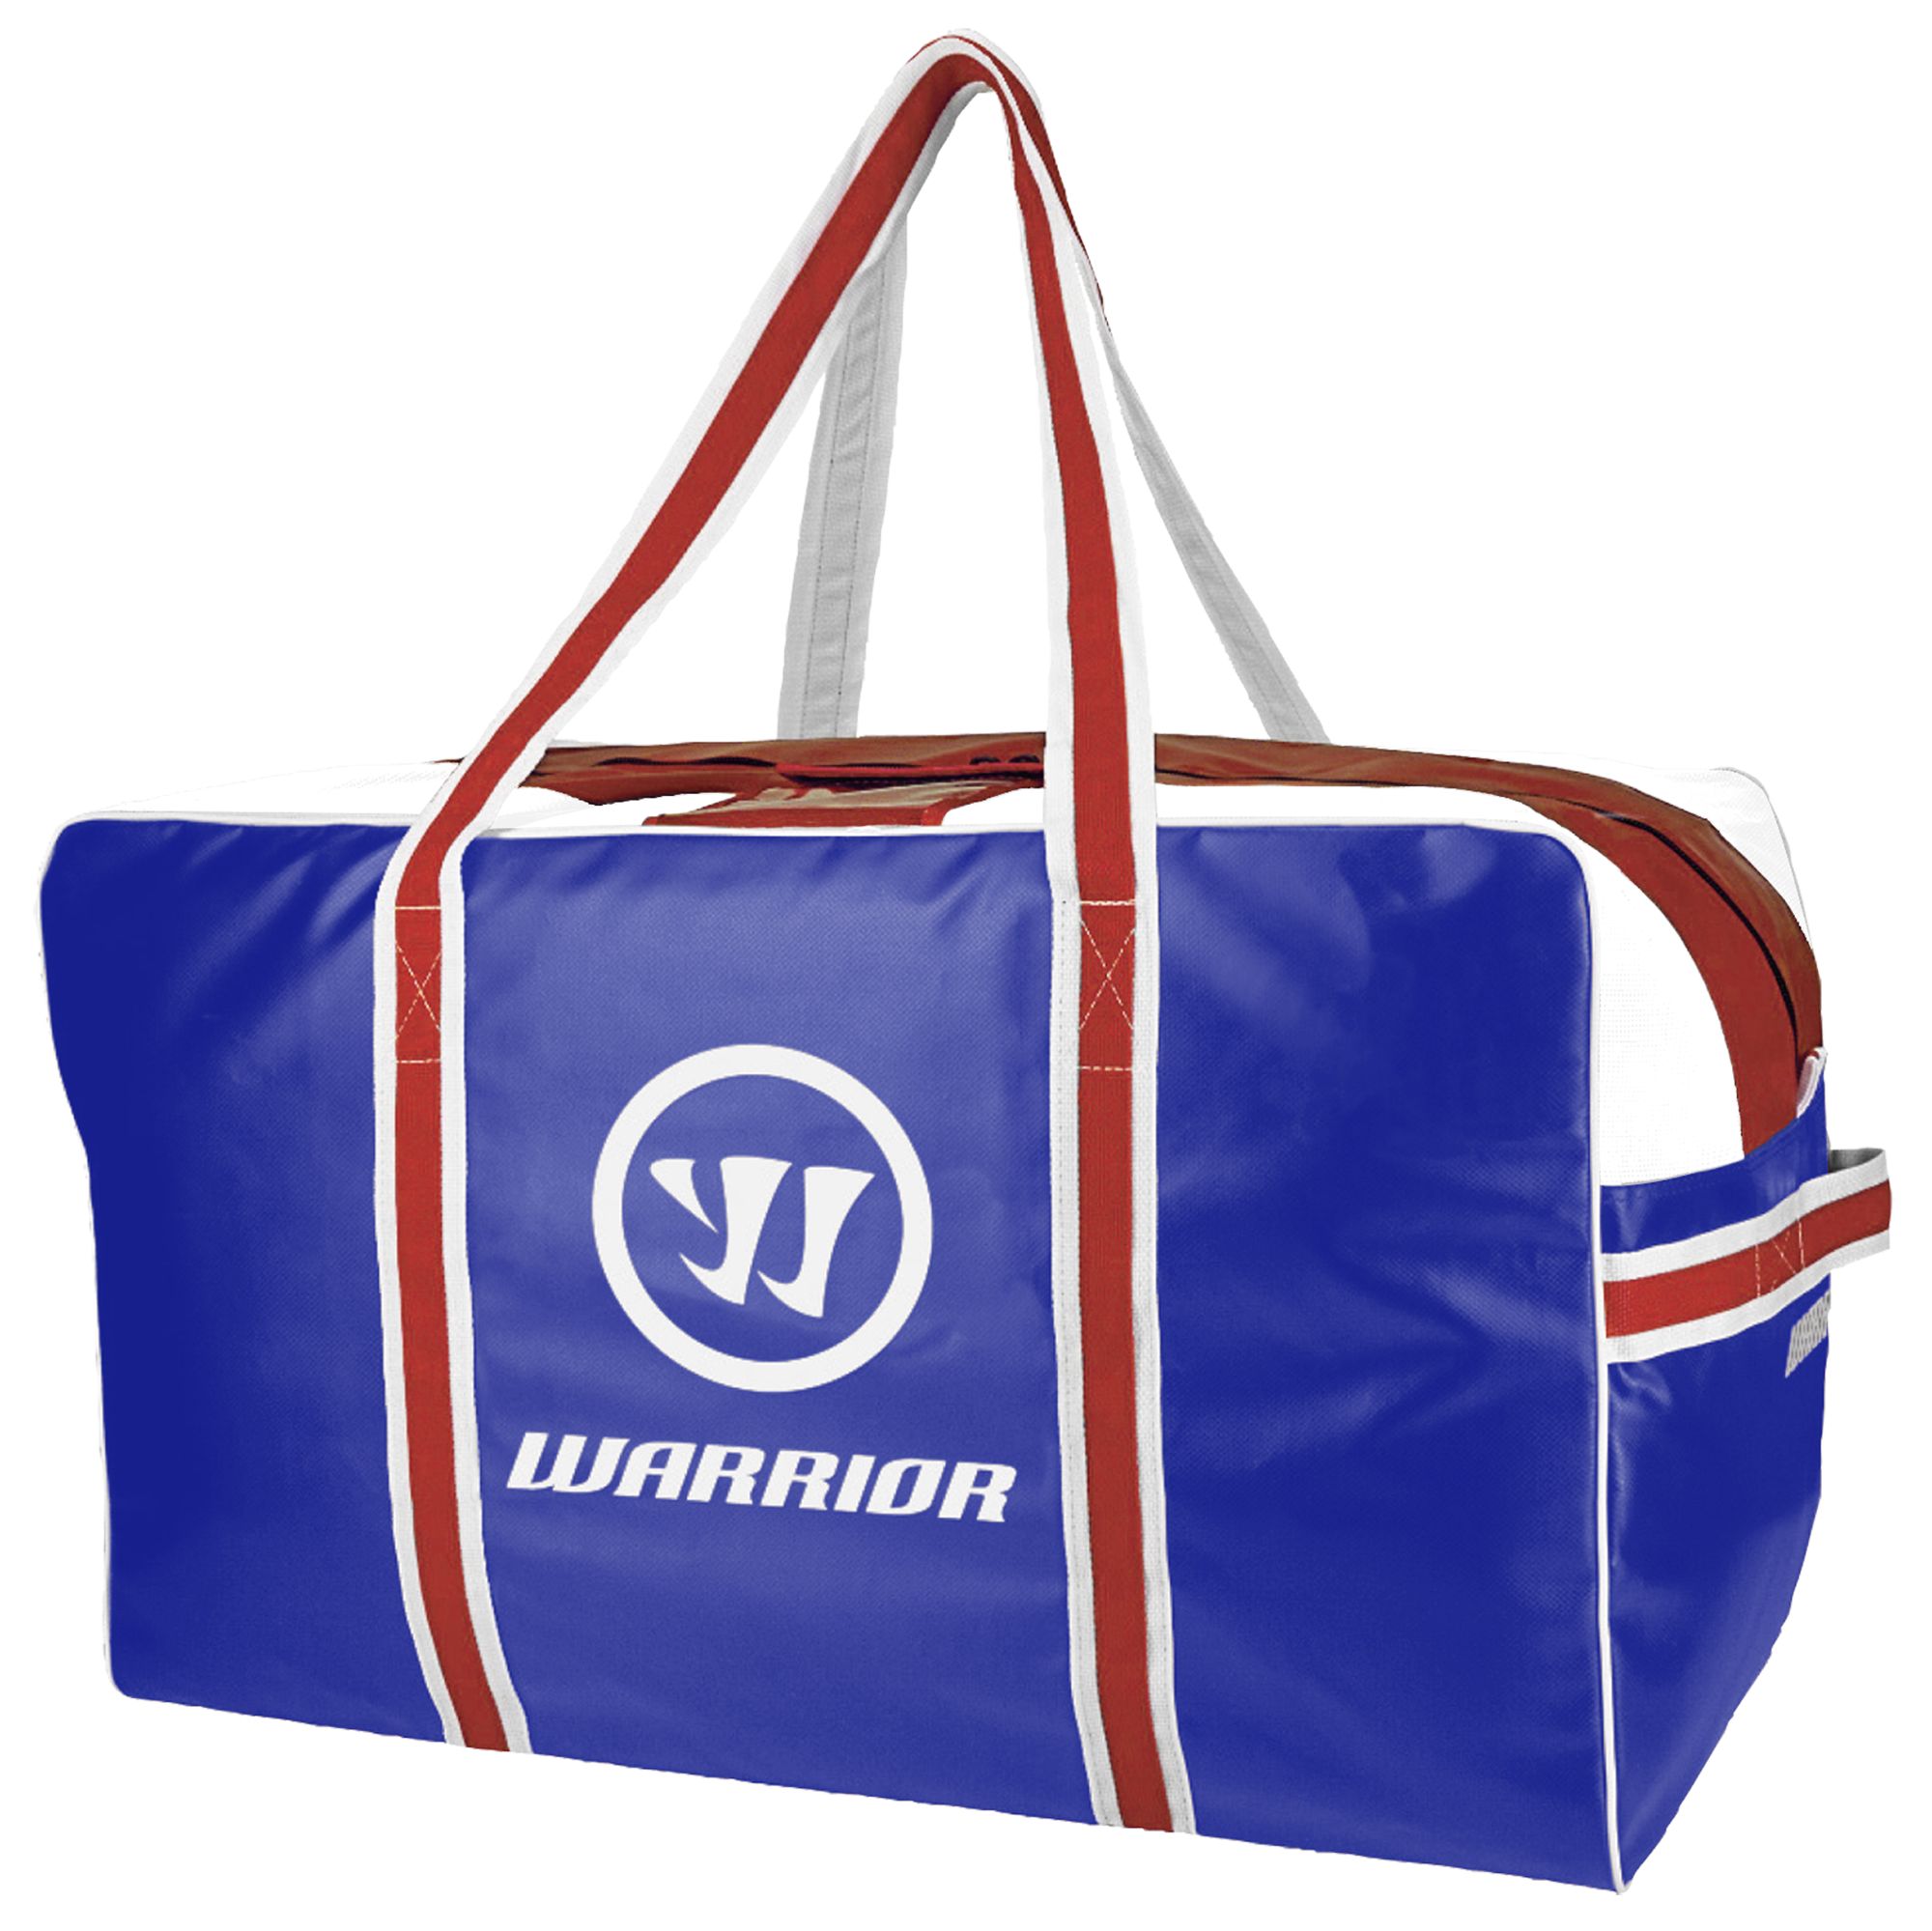 Warrior Pro Bag, Royal Blue with Red & White image number 1